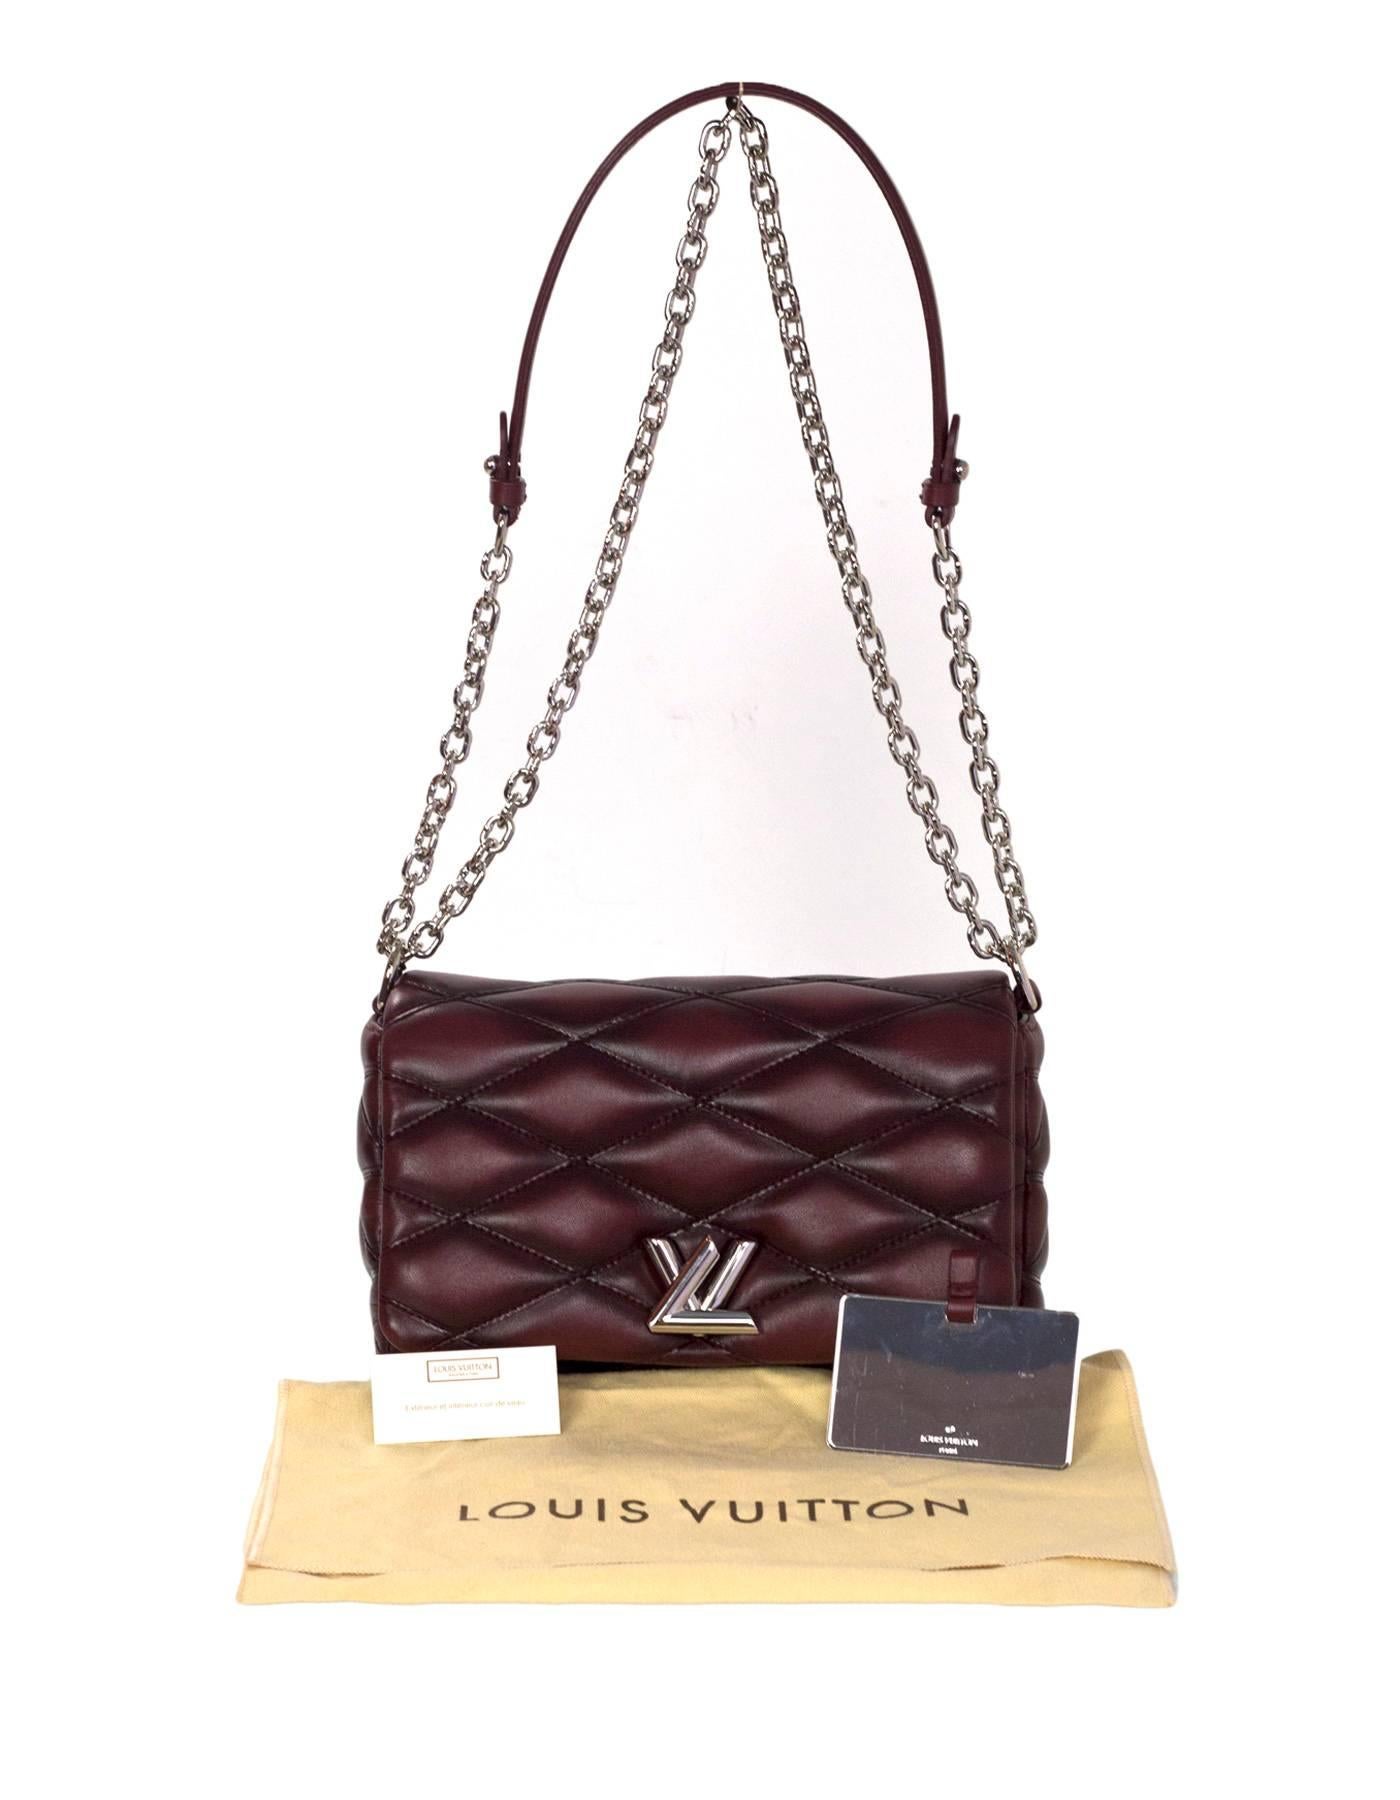 Louis Vuitton Burgundy Leather GO-14 Malletage PM Quilted Twist Bag rt. $3950 2